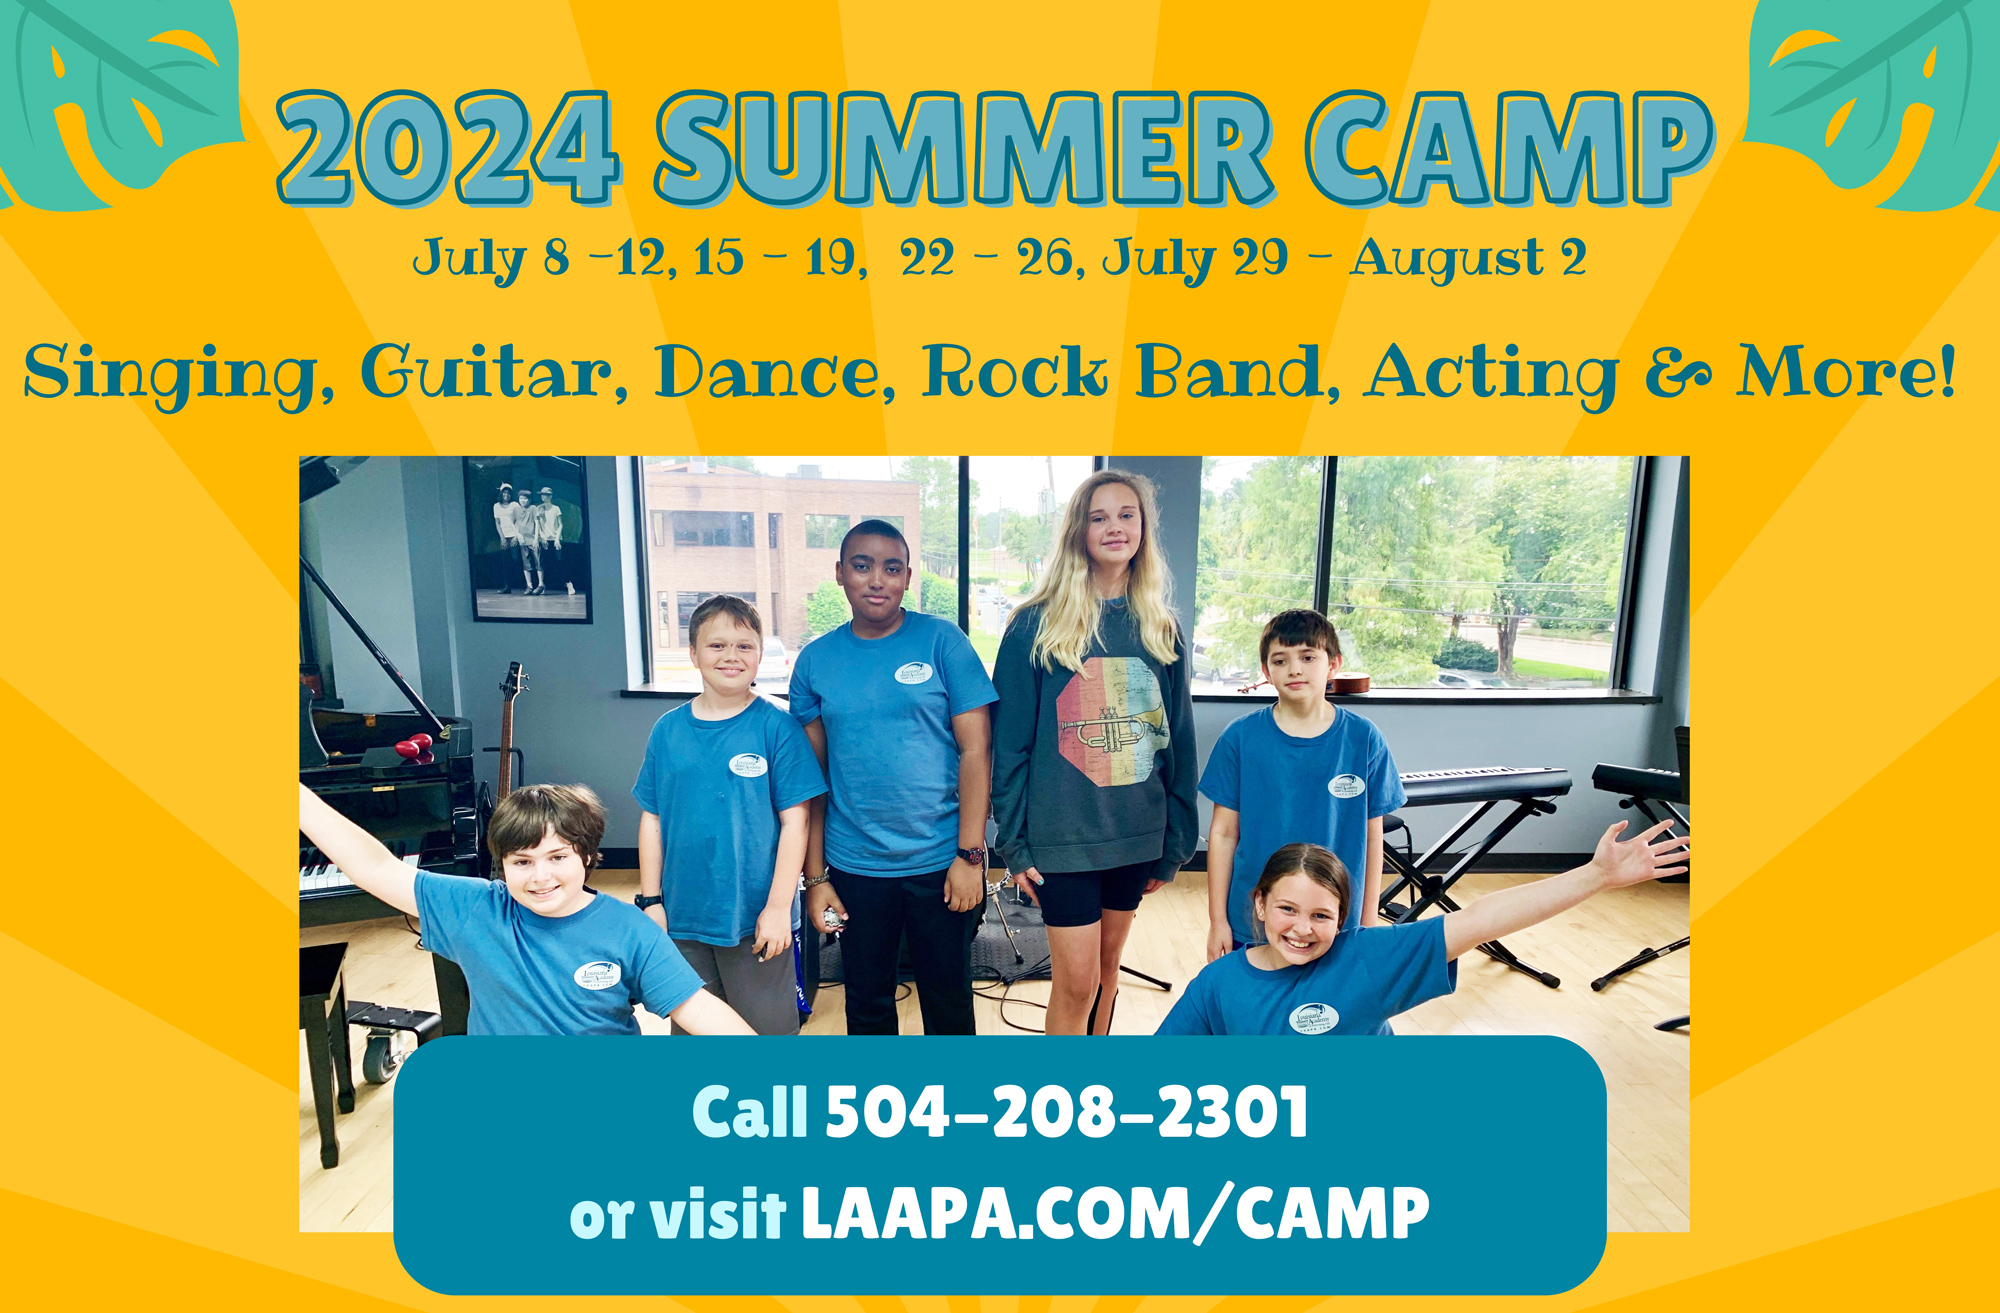 Learn to Play, Dance, Sing this Summer in Covington, Harahan, and Mandeville, LA!